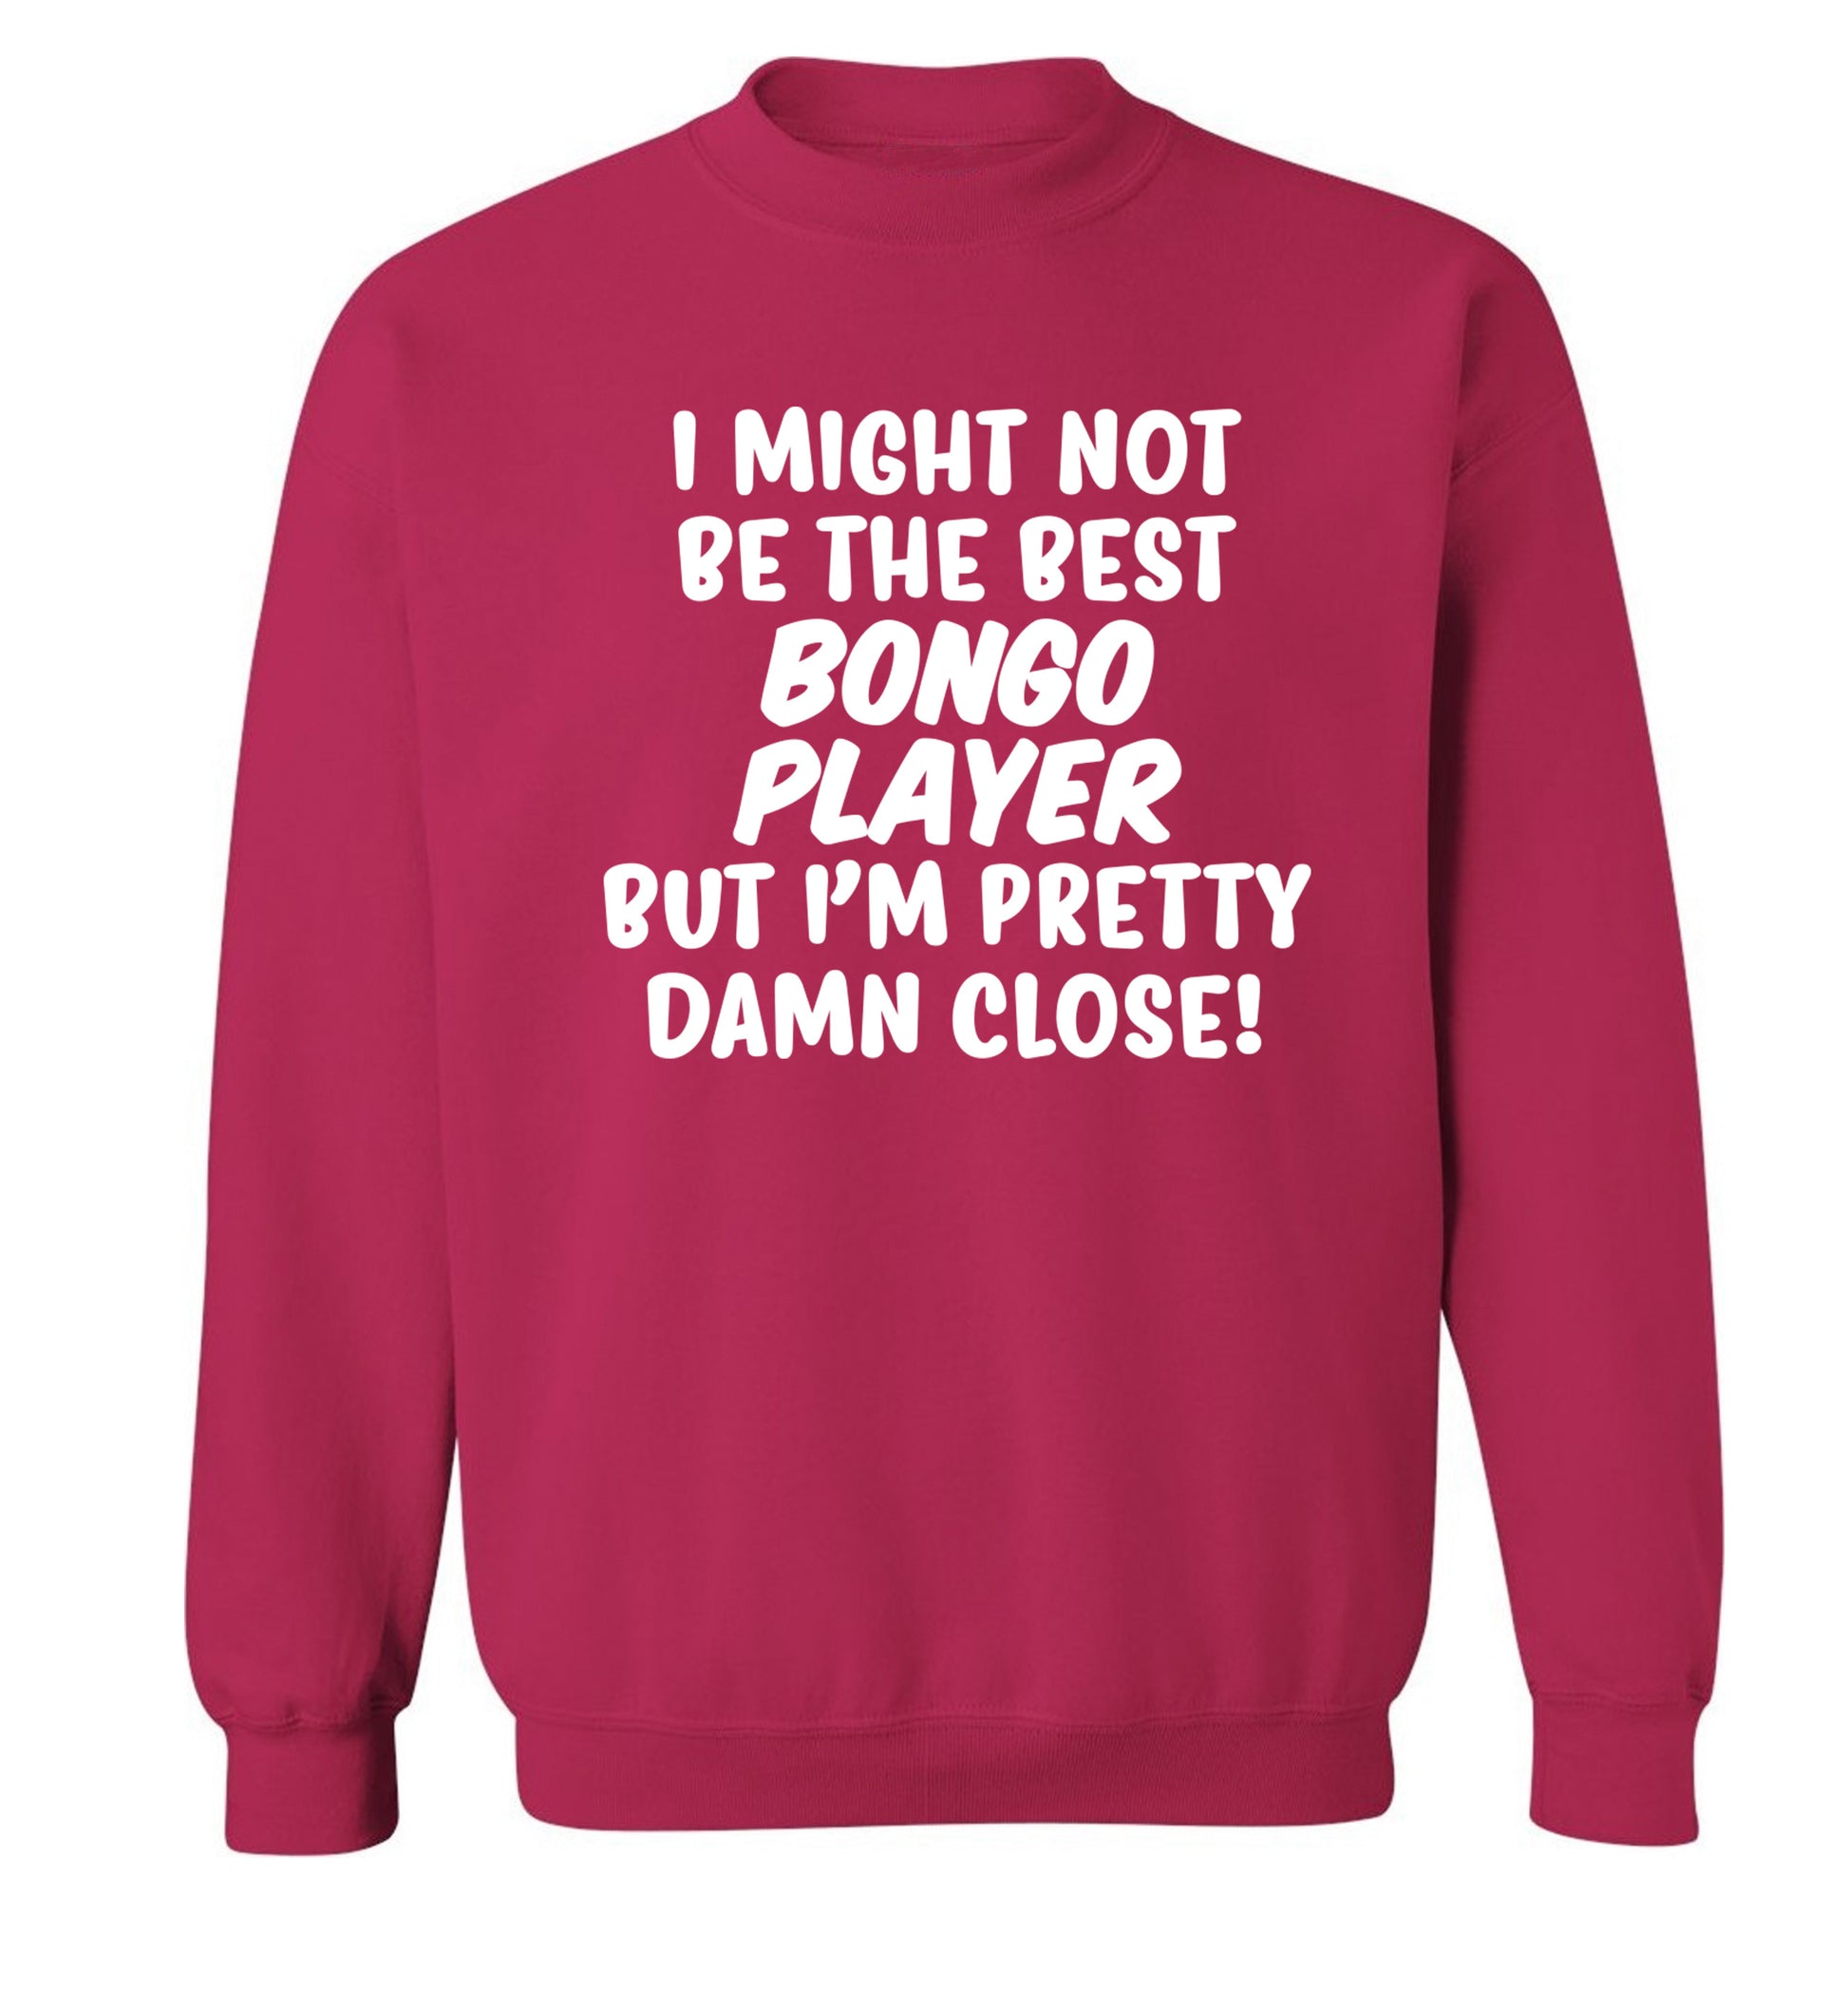 I might not be the best bongo player but I'm pretty close! Adult's unisexpink Sweater 2XL